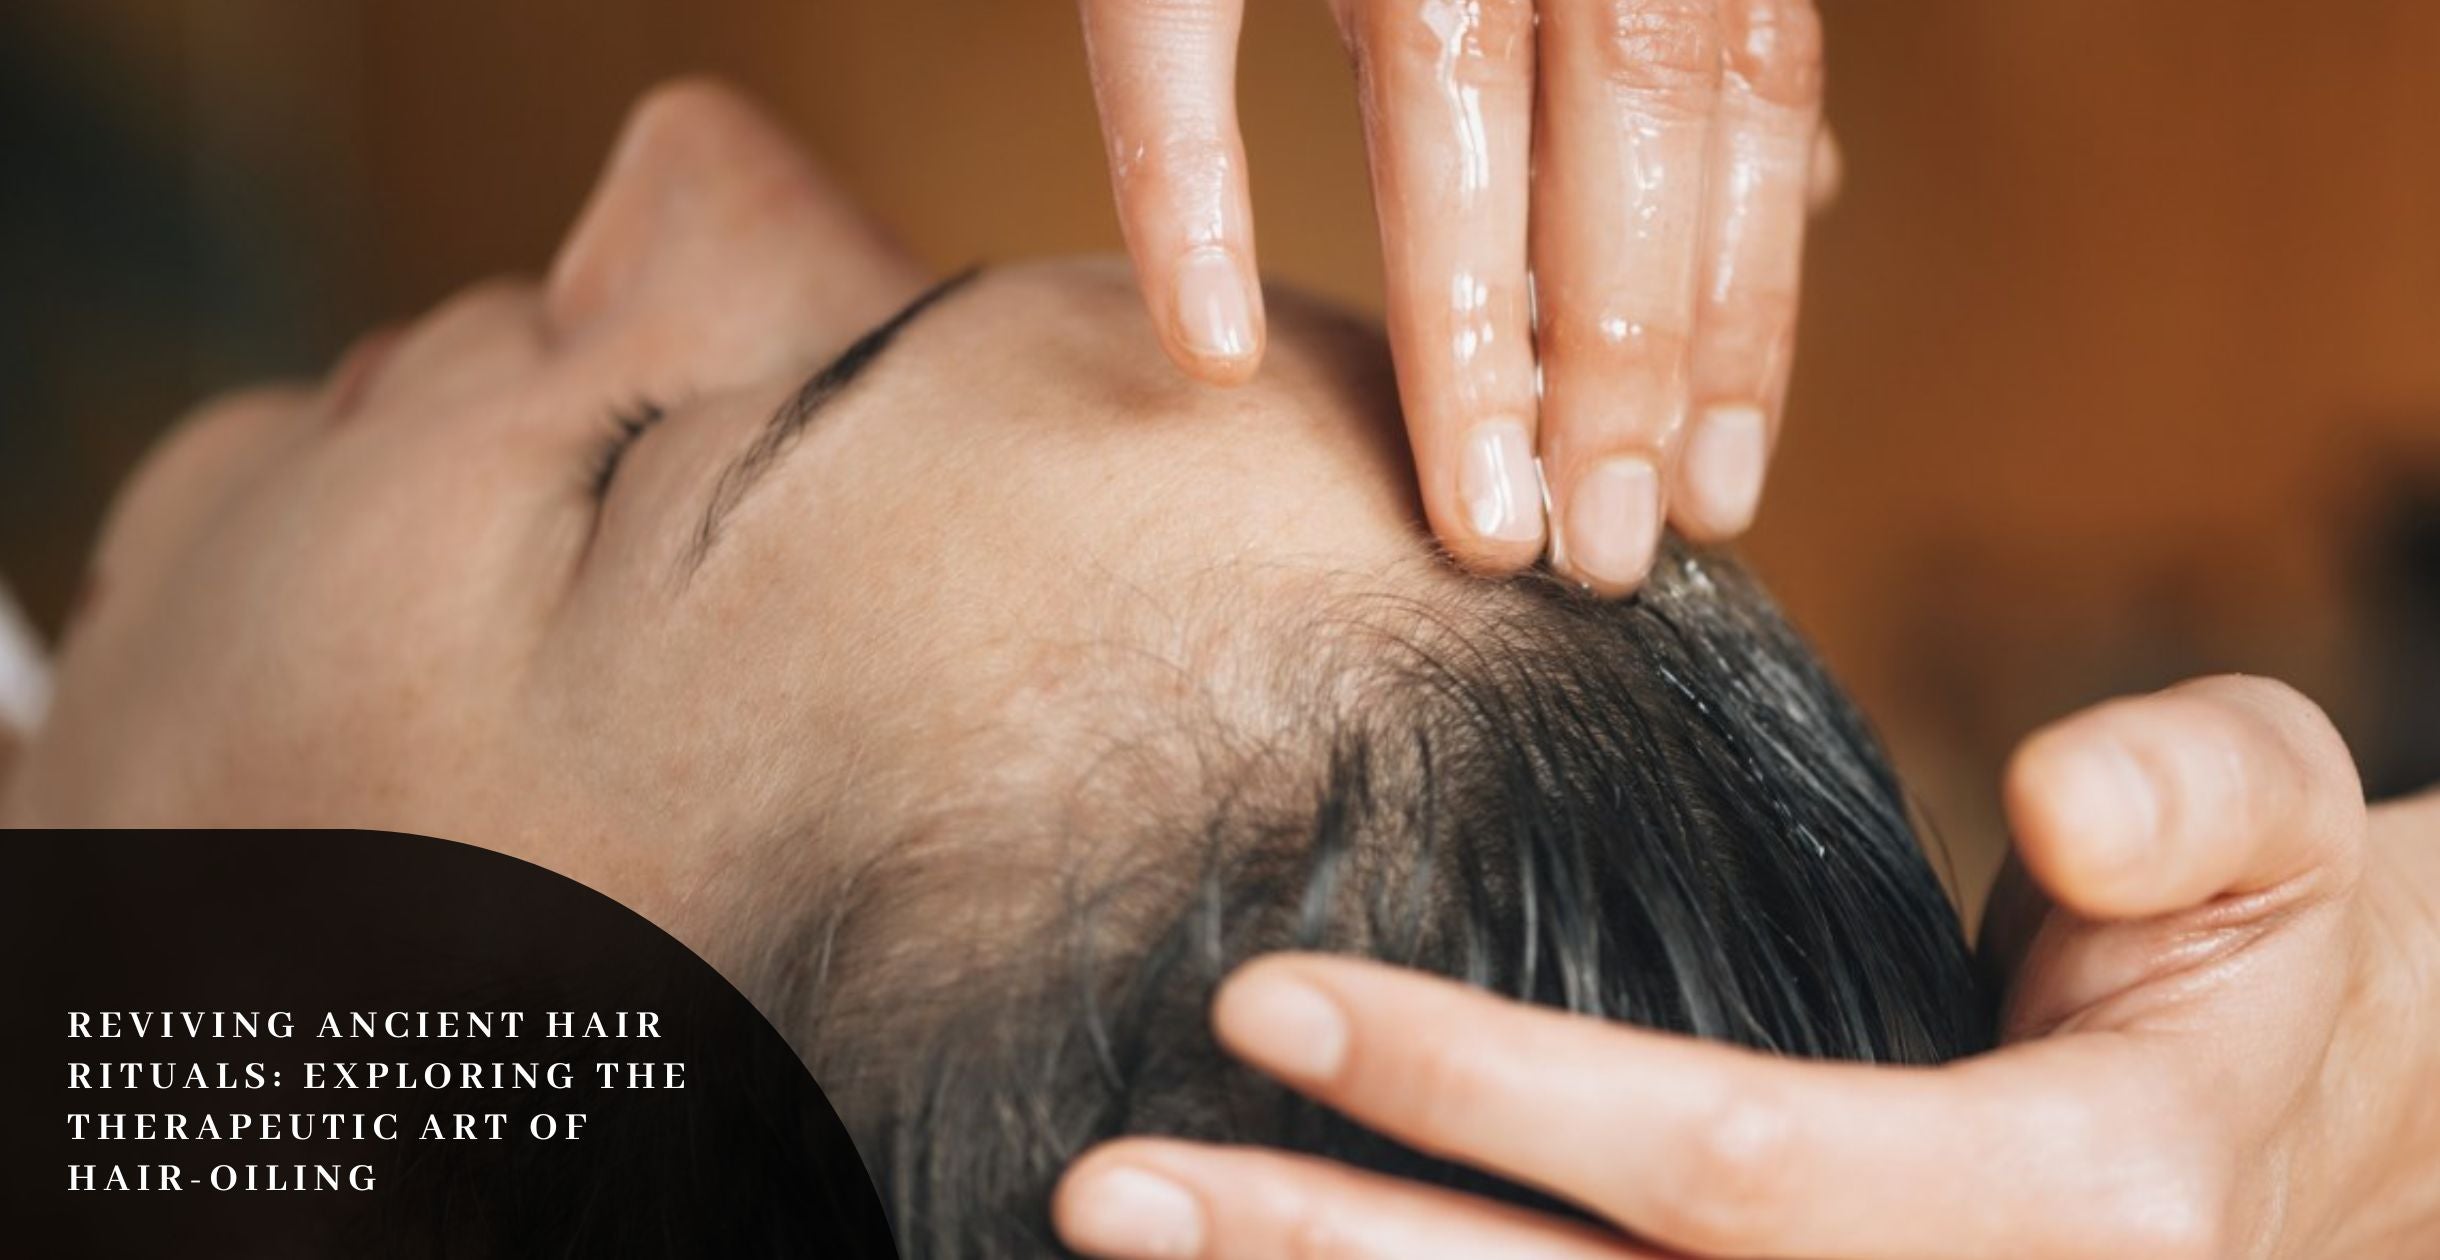 Reviving Ancient Hair Rituals: Exploring the Therapeutic Art of Hair-Oiling